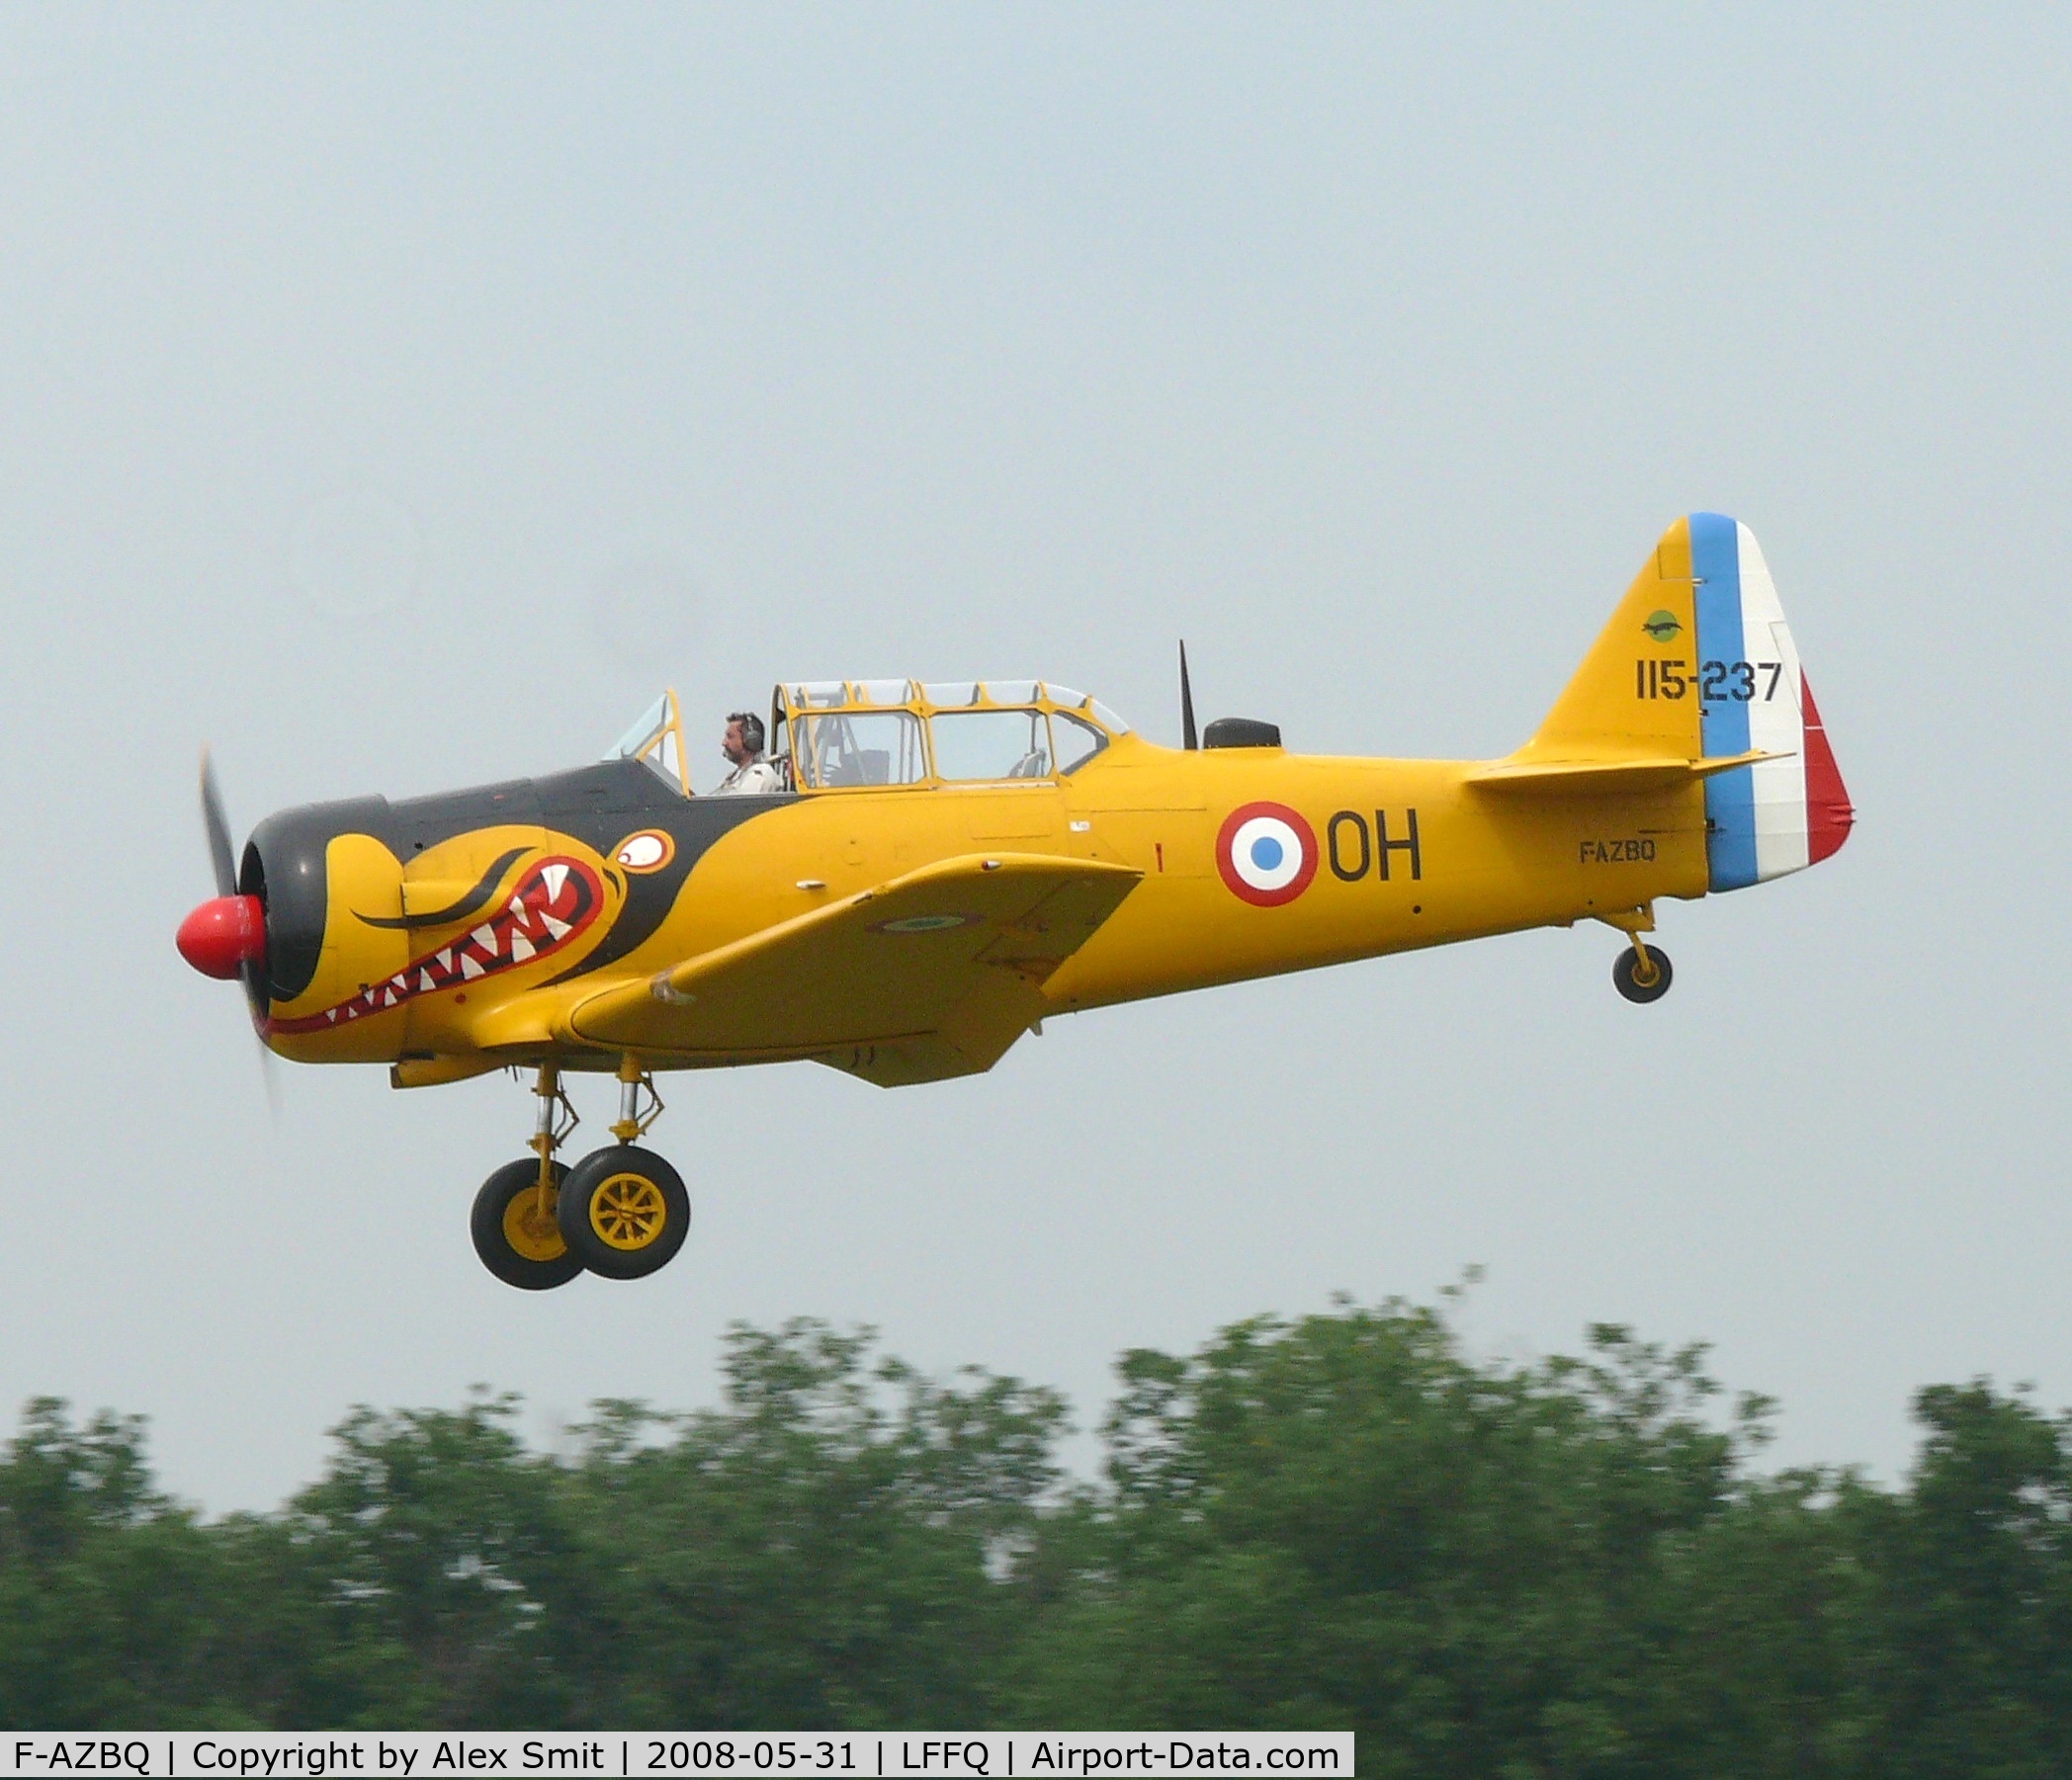 F-AZBQ, North American T-6G Texan C/N 182-535, North American T-6G Texan F-AZBQ painted as French Air Force 115-237/HO